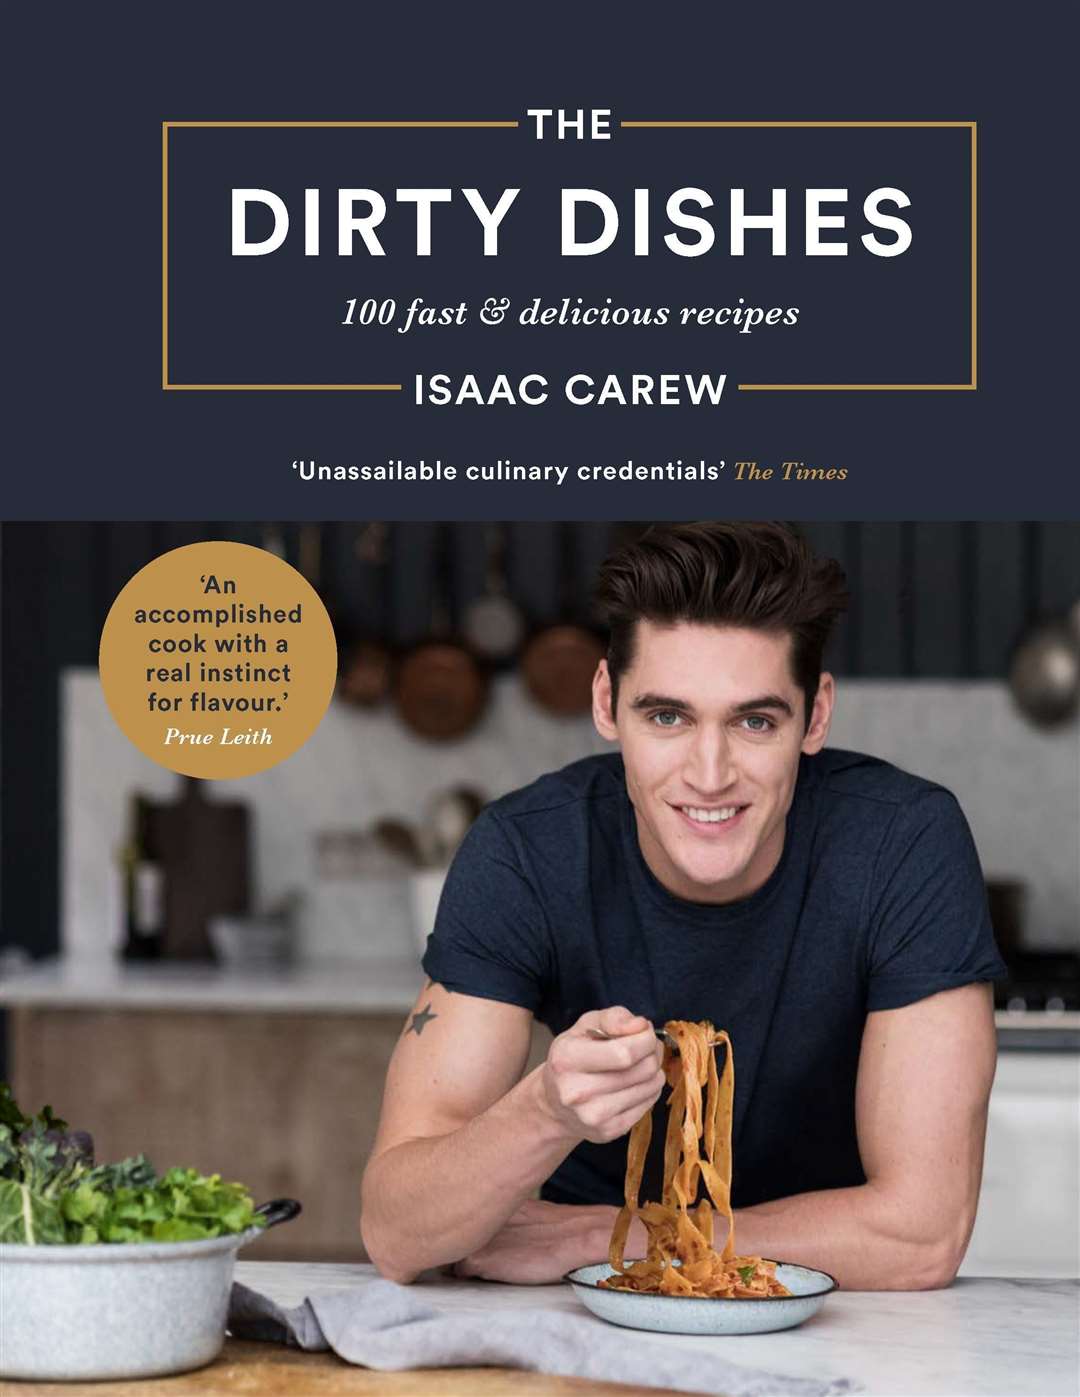 The Dirty Dishes: 100 Fast And Delicious Recipes by Isaac Carew is published by Bluebird, priced £20. Available now. Picture: Susan Bell/PA